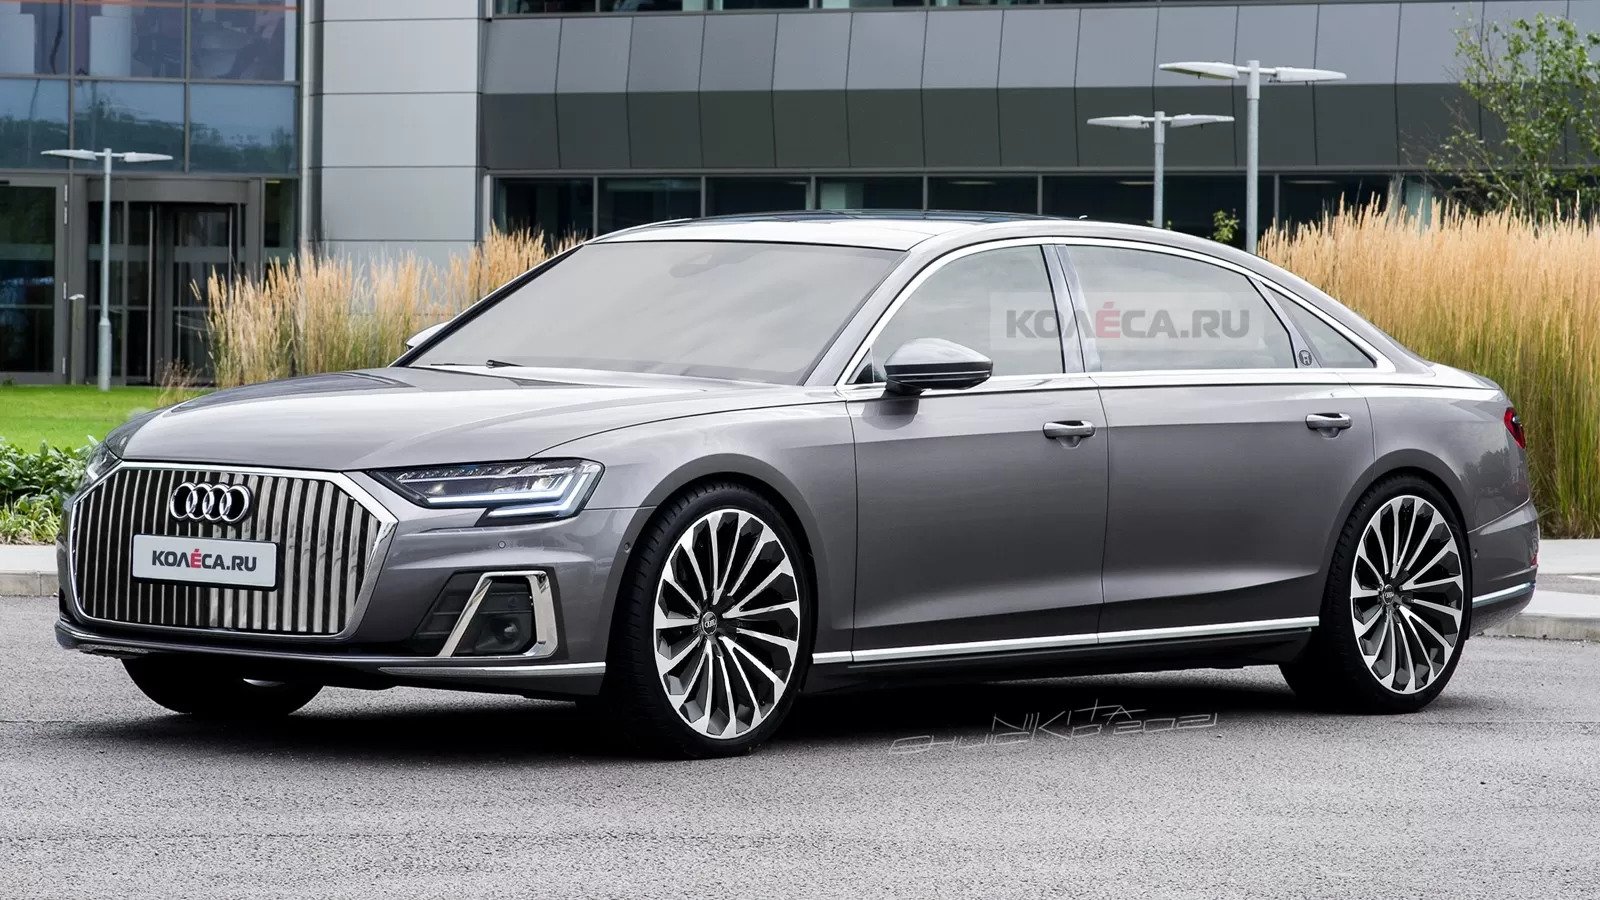 Long-Rumored Audi A8 L Horch Comes To Life In Detailed Renderings